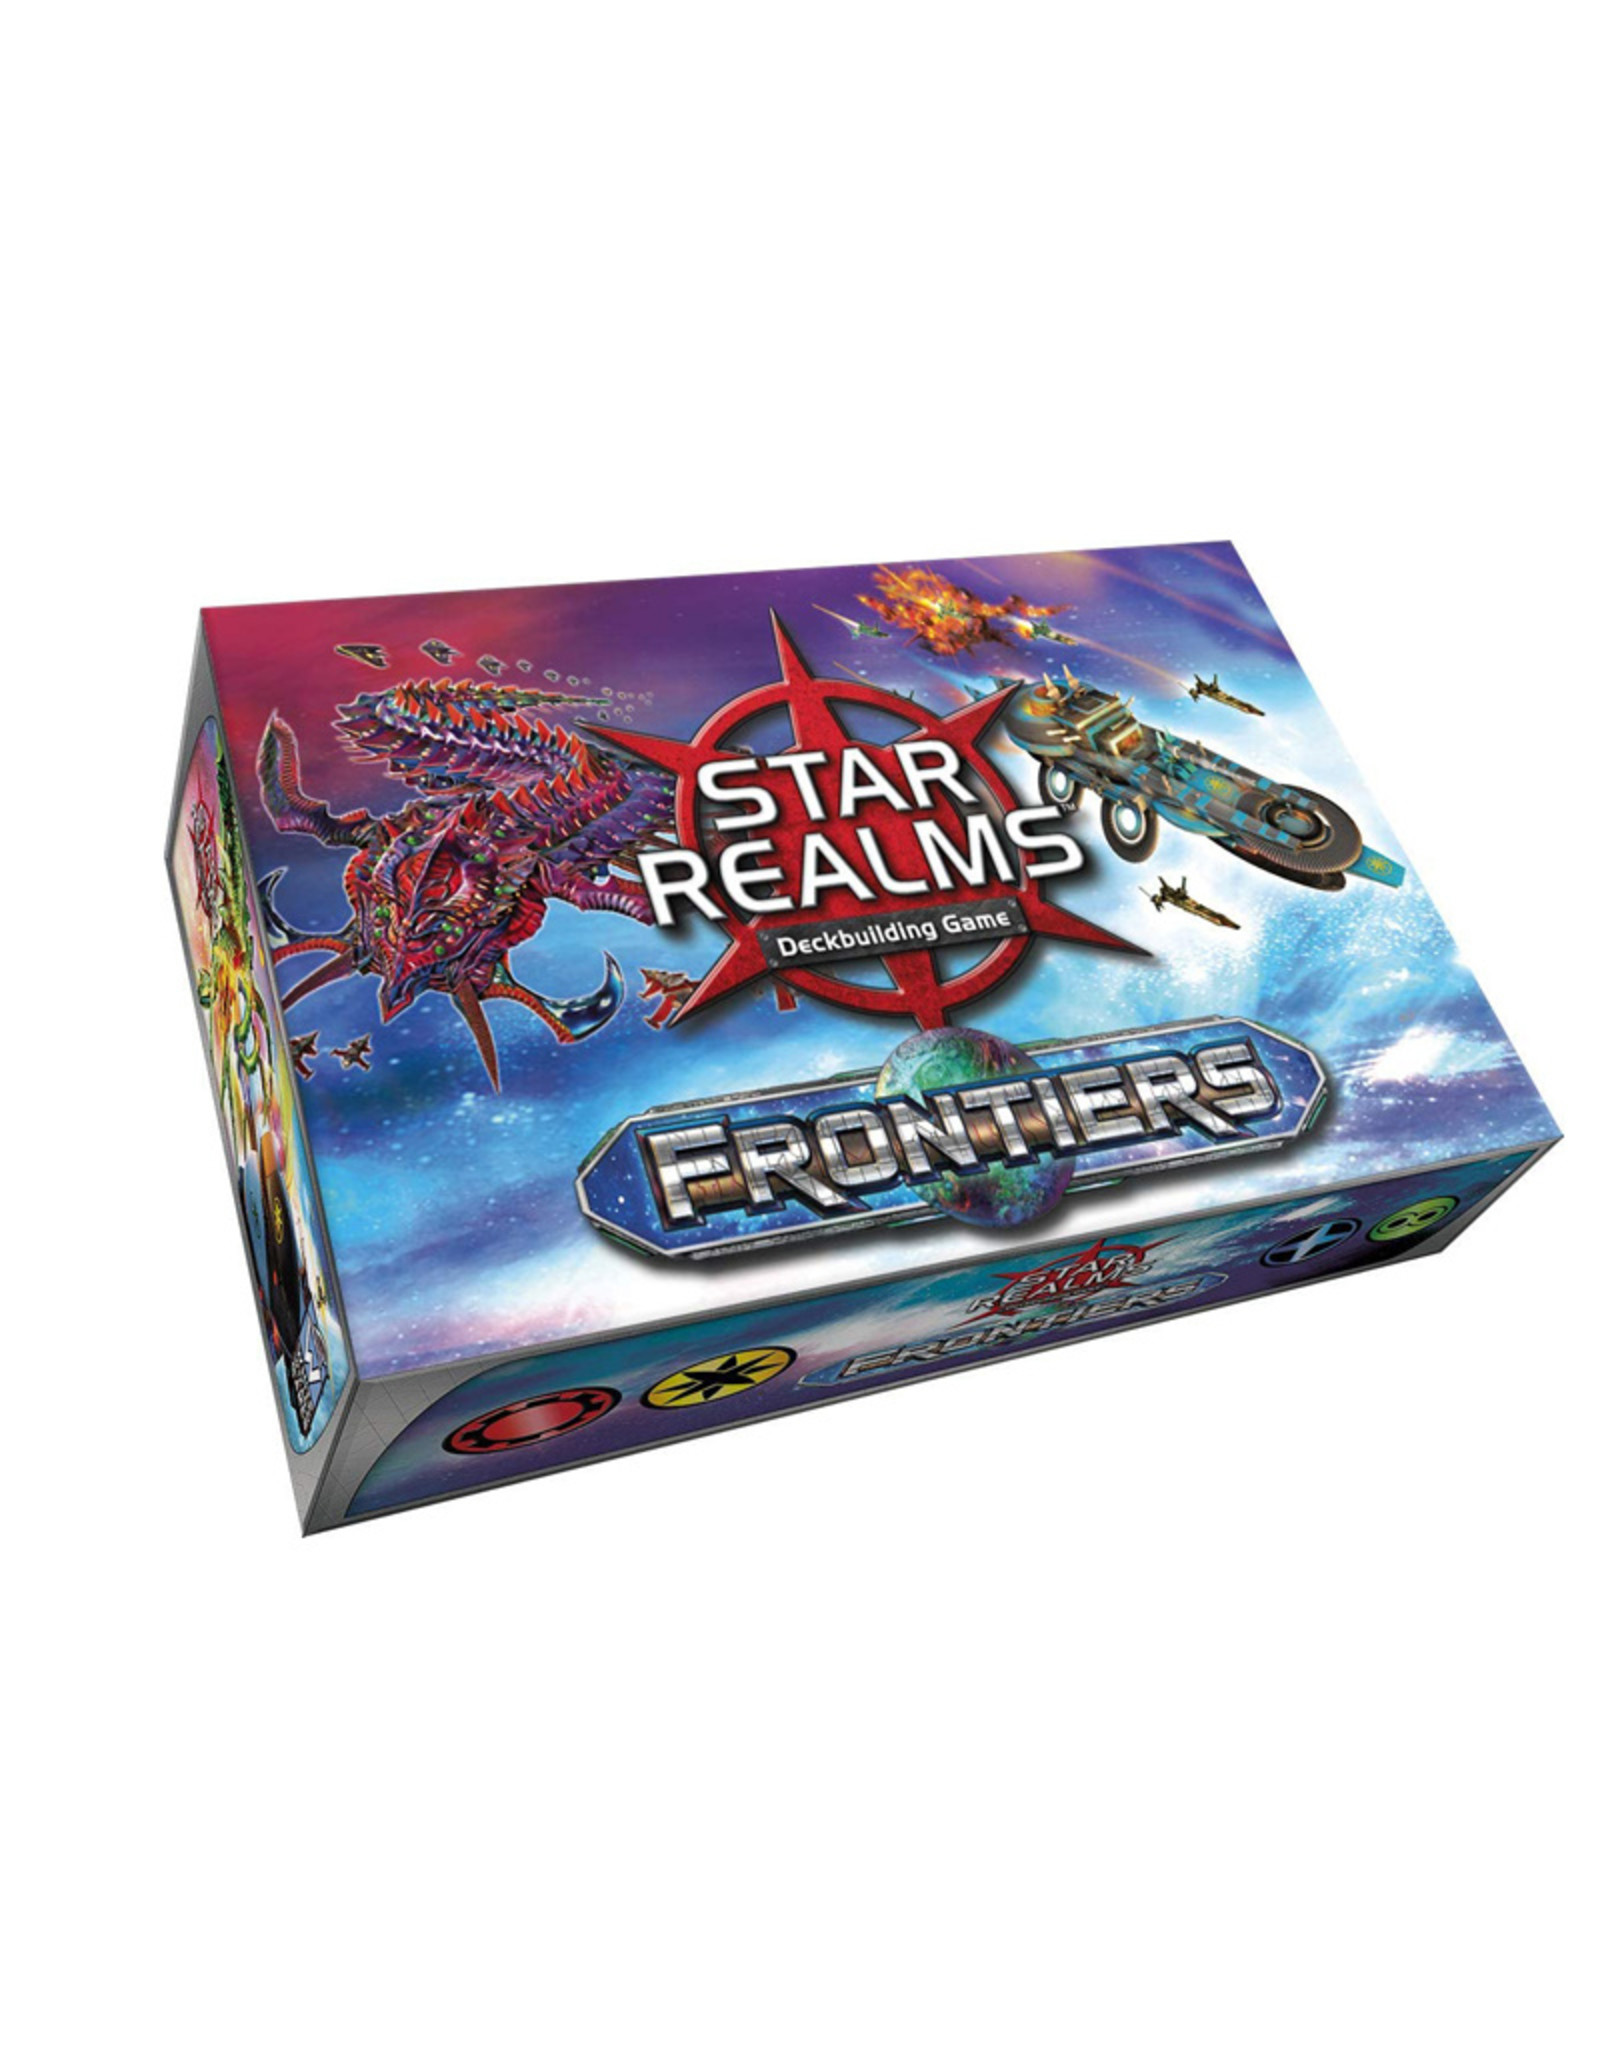 White Wizard Games Star Realms: Frontiers